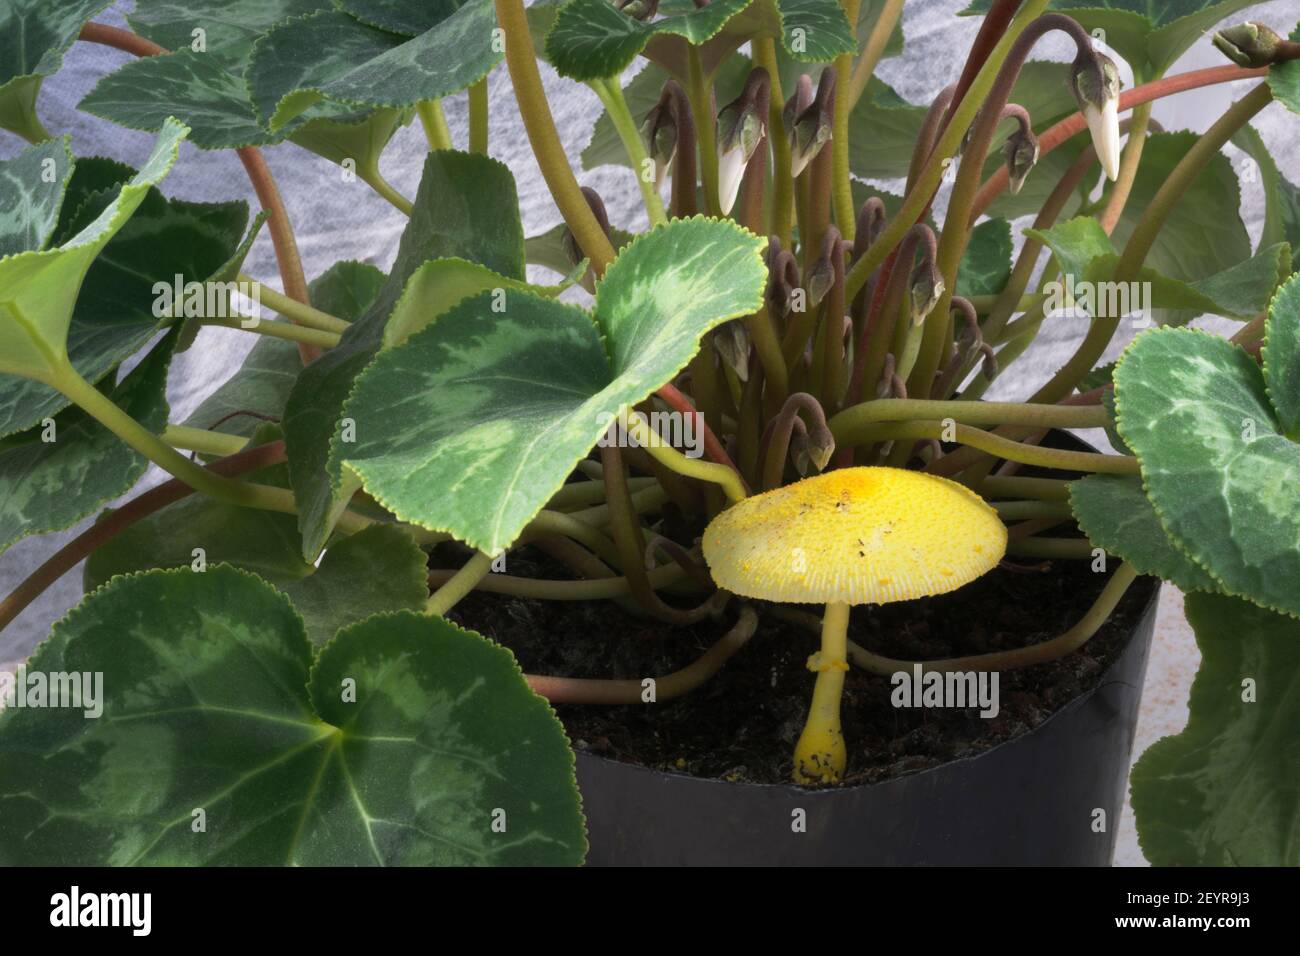 Leucocoprinus birnbaumii, Lepiota lutea, Yellow houseplant mushroom, a Saprotrophic mushroom, inedible, and frequently occuring in potting compost. Stock Photo